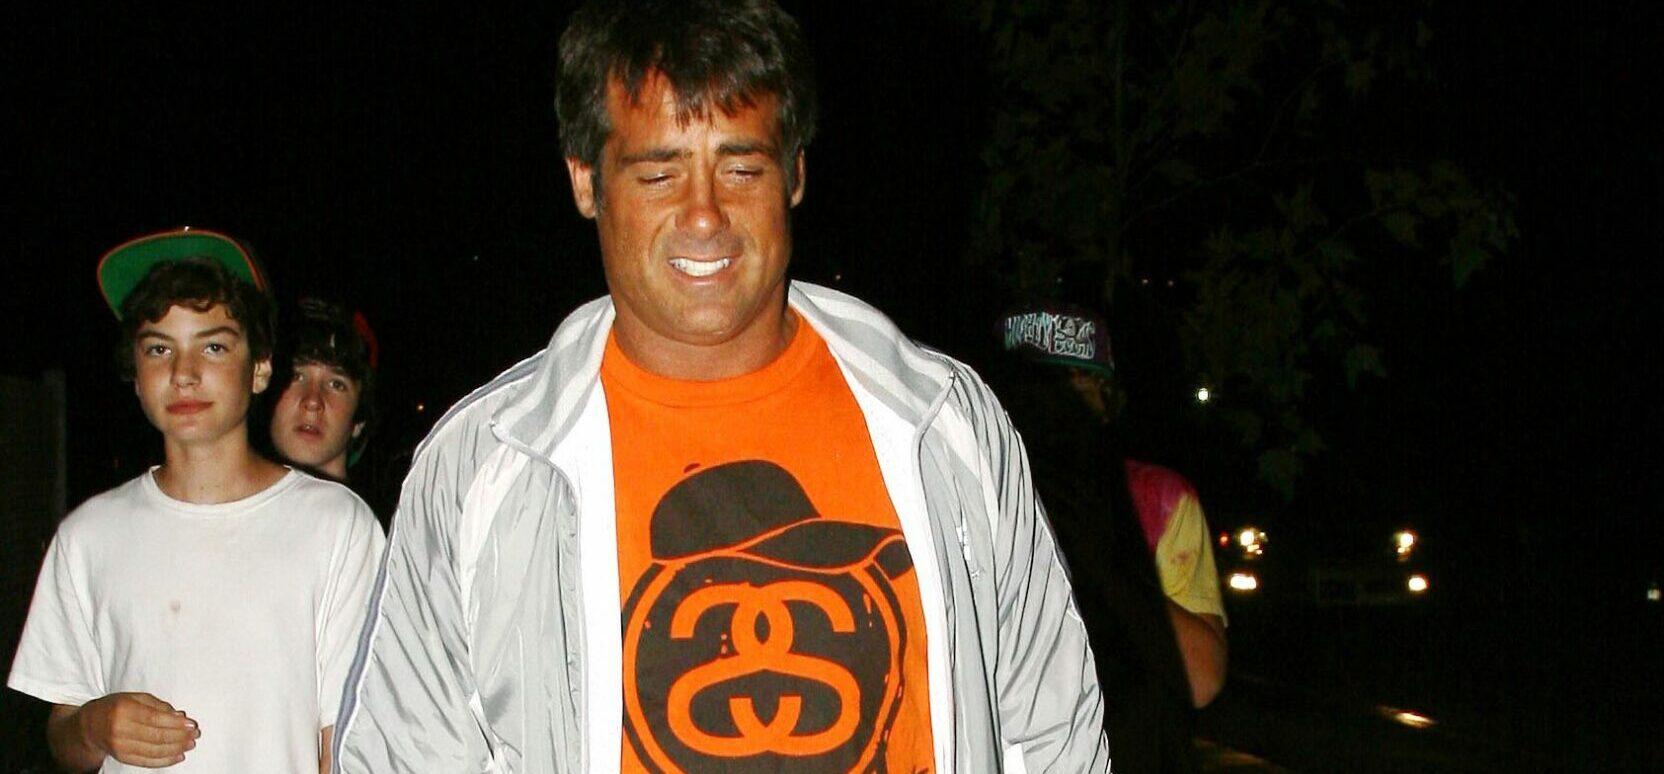 Waterboy’ Star Peter Dante Arrested For Allegedly Threatening To Kill His Neighbor